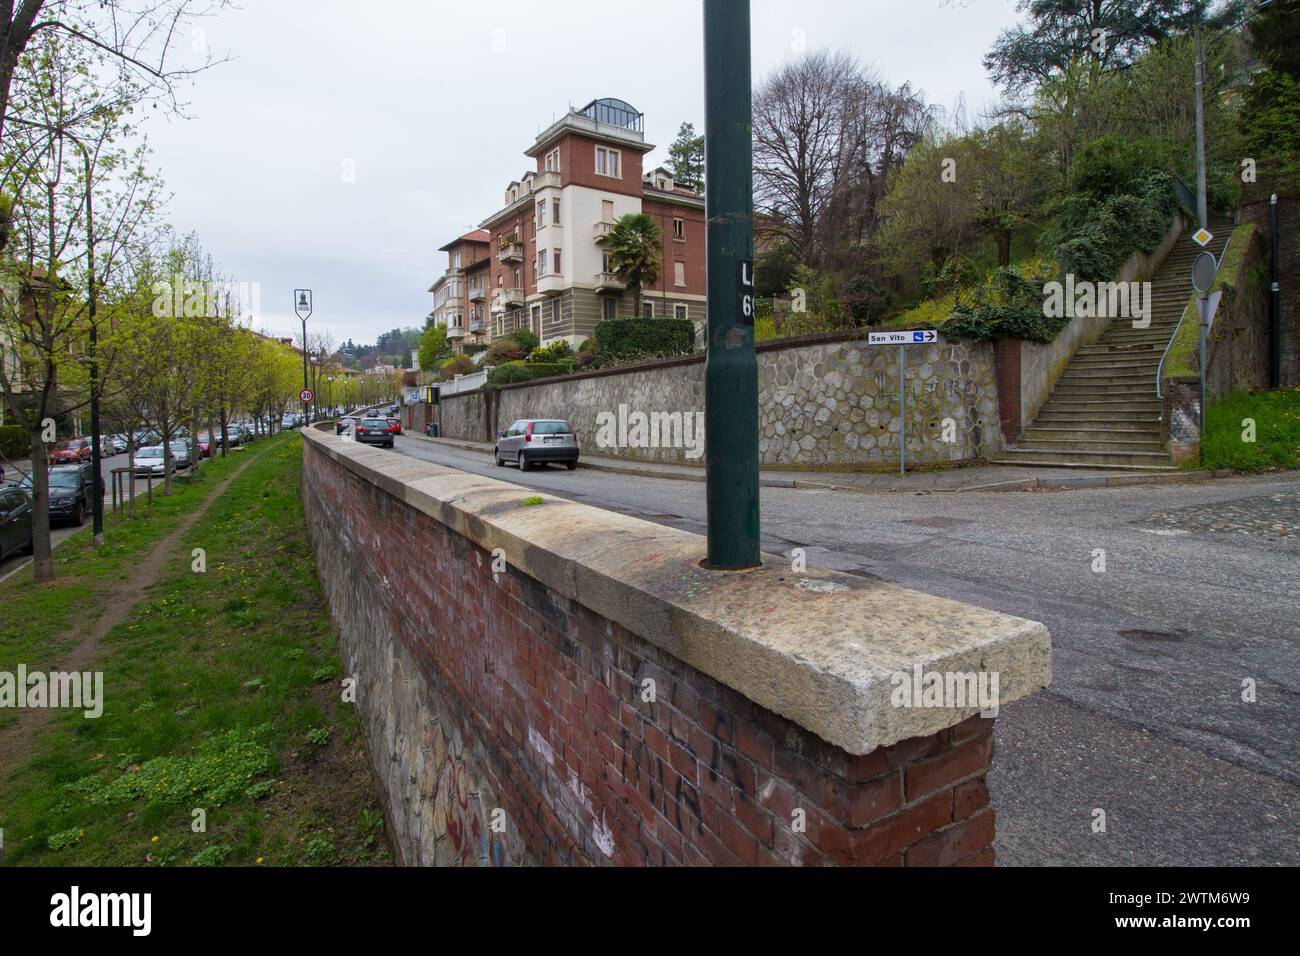 View of Borgo Crimea in Turin, next to the hills, with a road, an elegant building, a path and a stairway Stock Photo